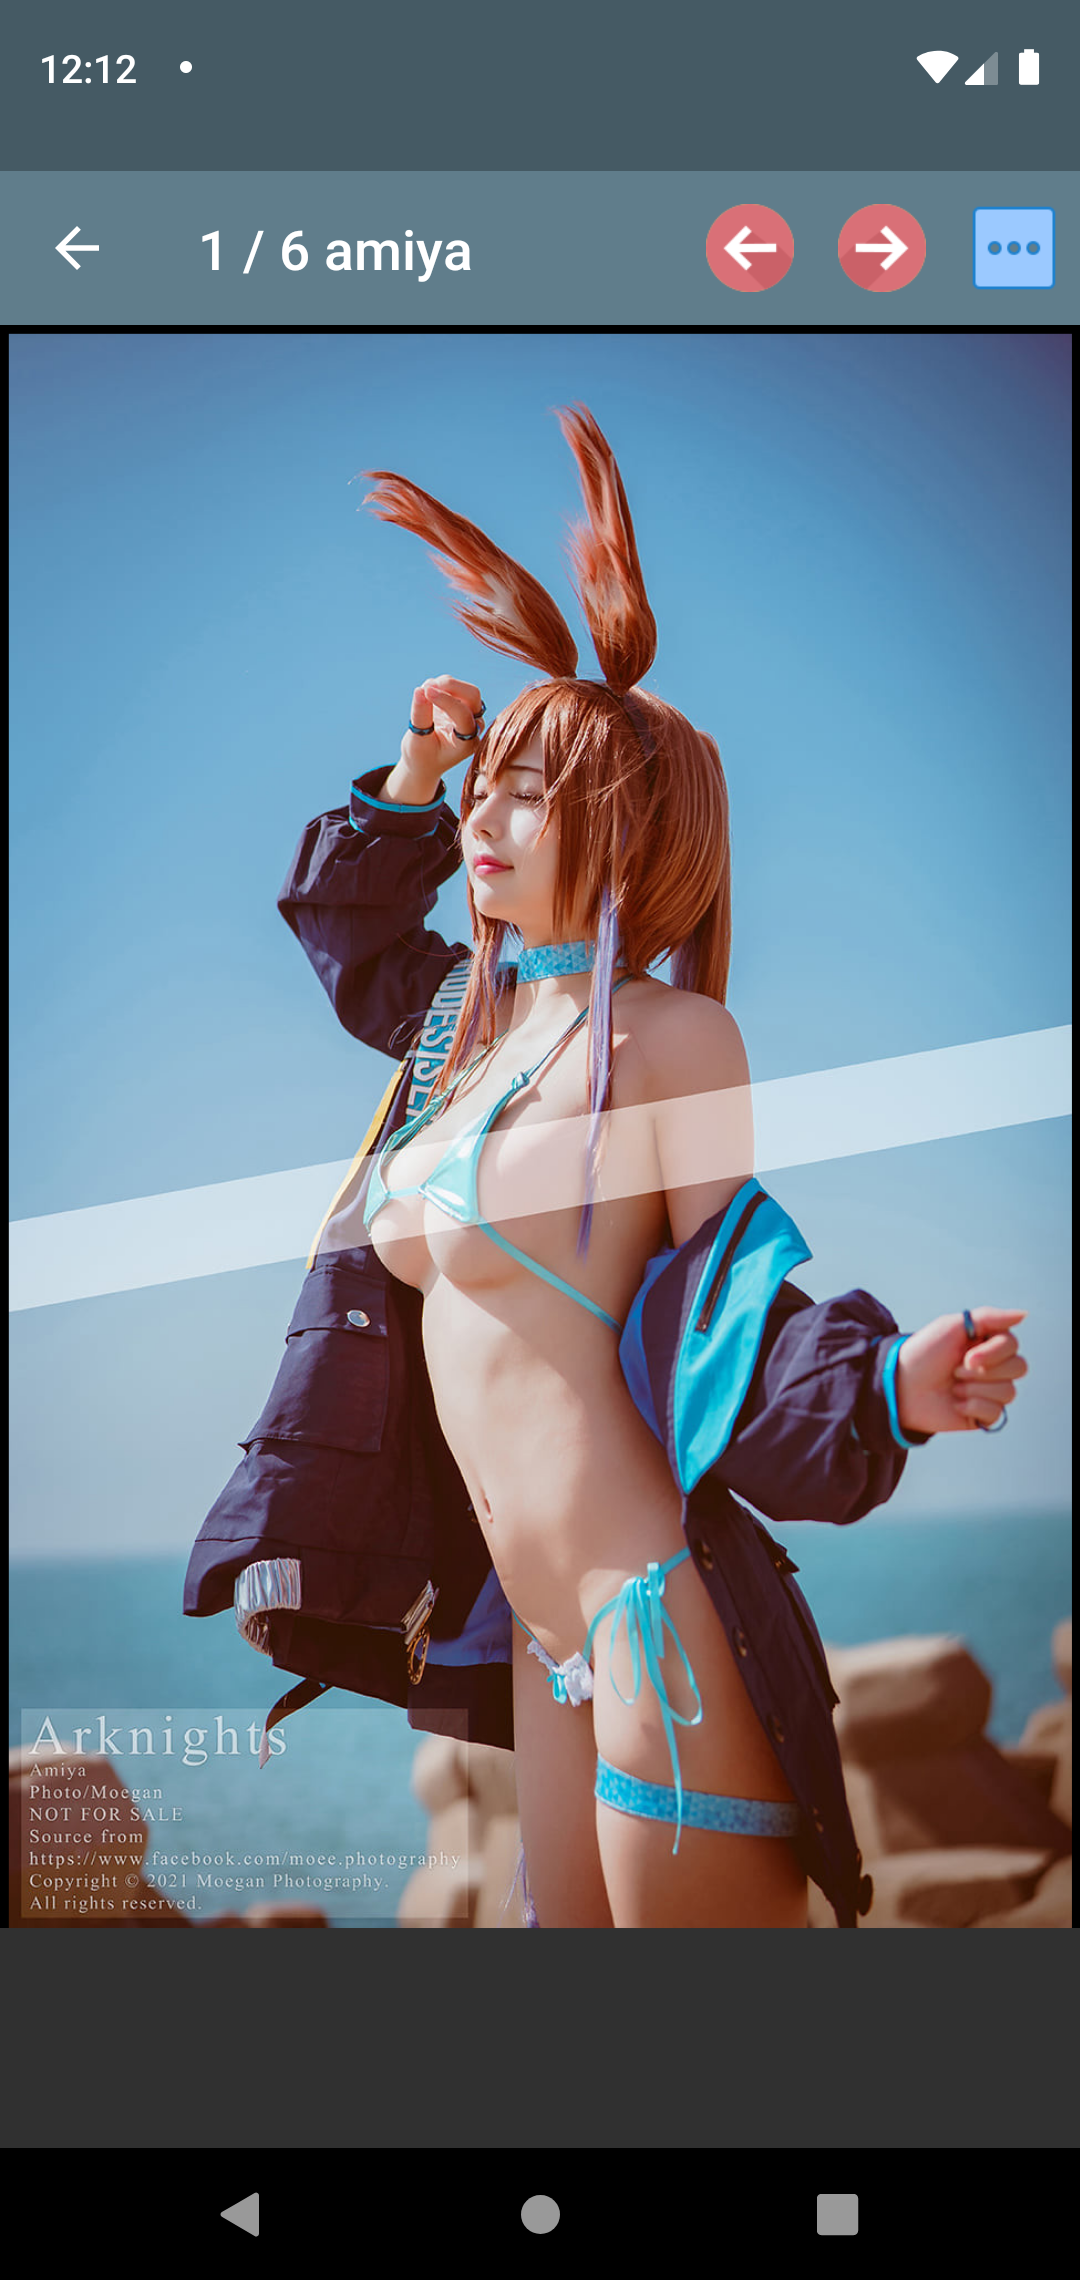 Okita Rinka Pictues asian,excuses,photos,download,porn,hentai,henti,pics,pucs,best,pictures,shemale,apps,cosplay,sexy,for,softcore,gag,free,wallpaper,picture,hot,android,sissy,erotic,apk,watching